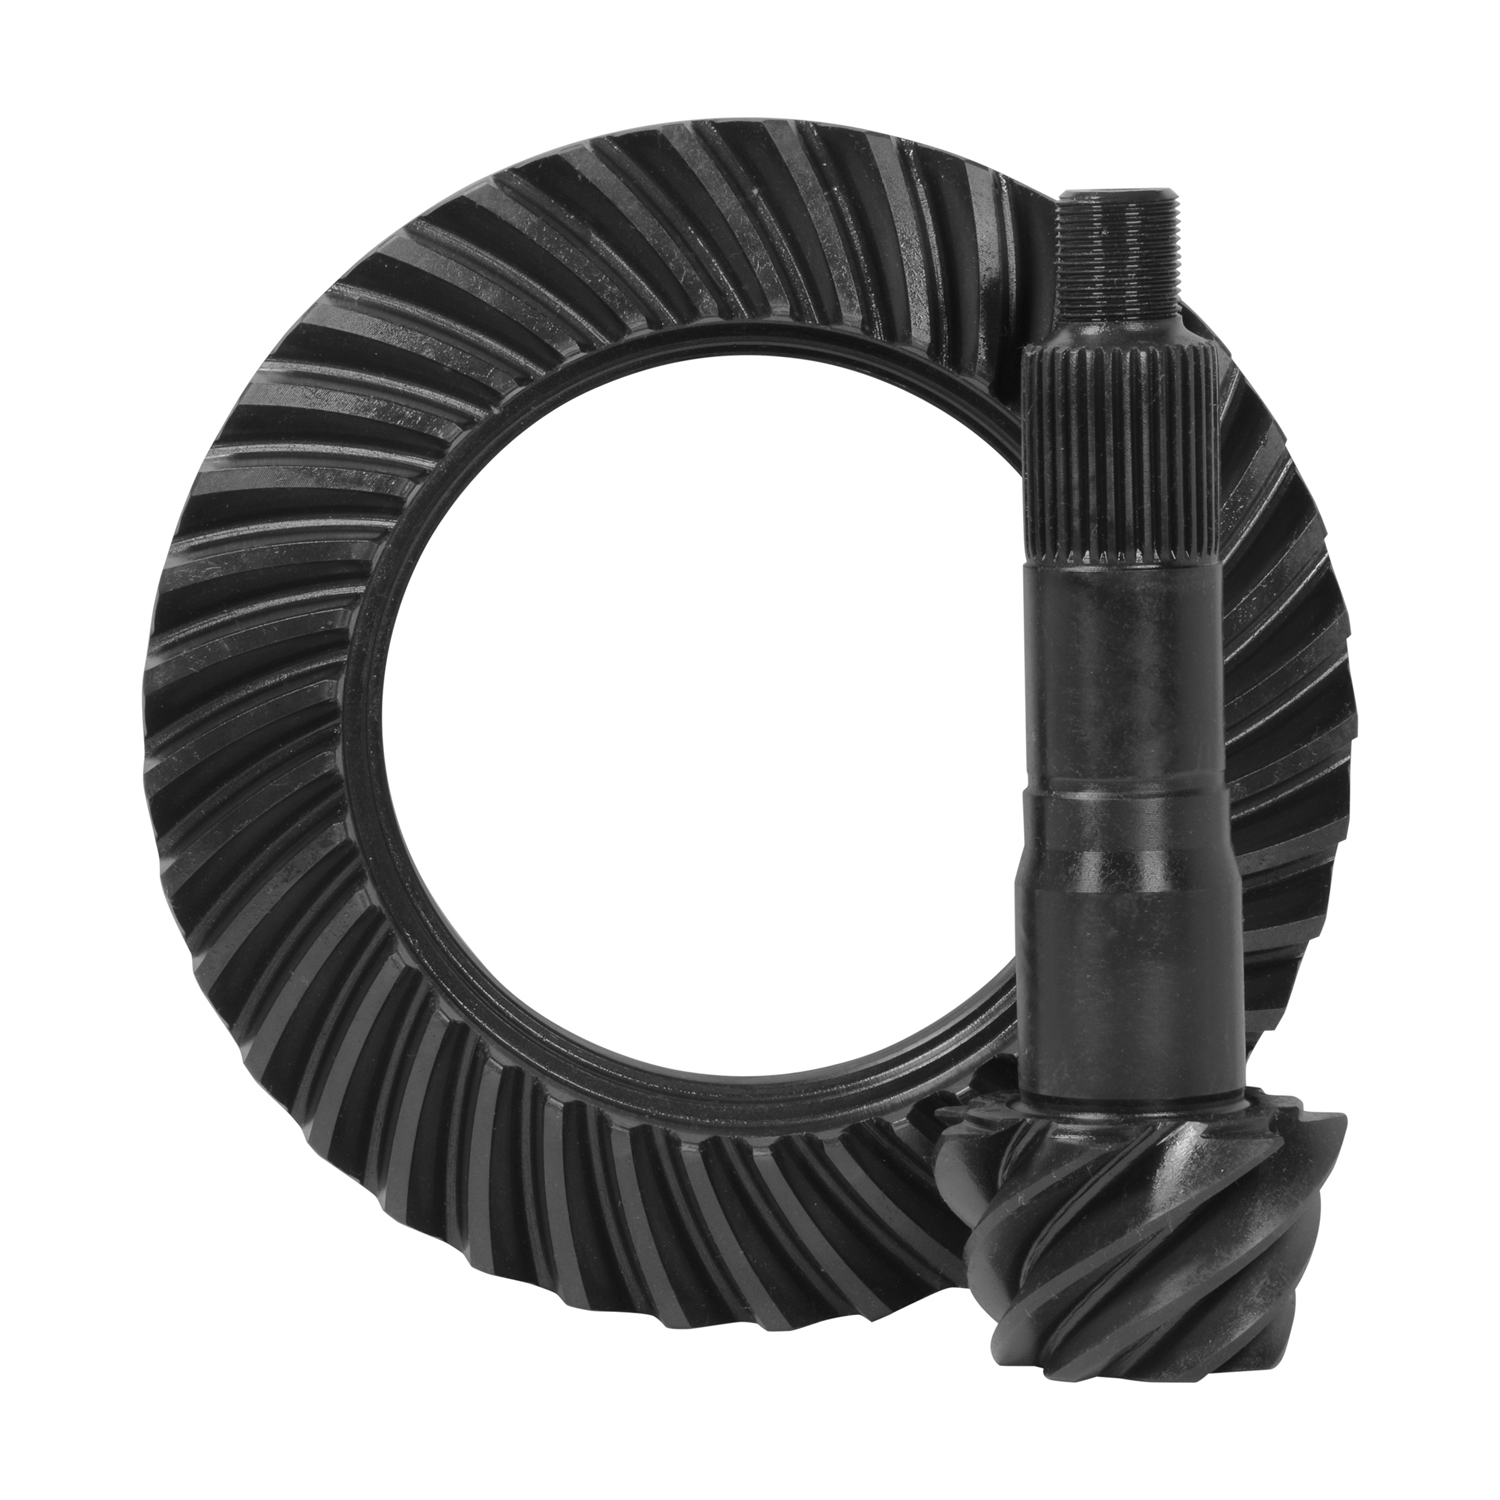 Yukon Ring and Pinion Gear Set for Toyota 9” Front Differential, 5.29 Ratio